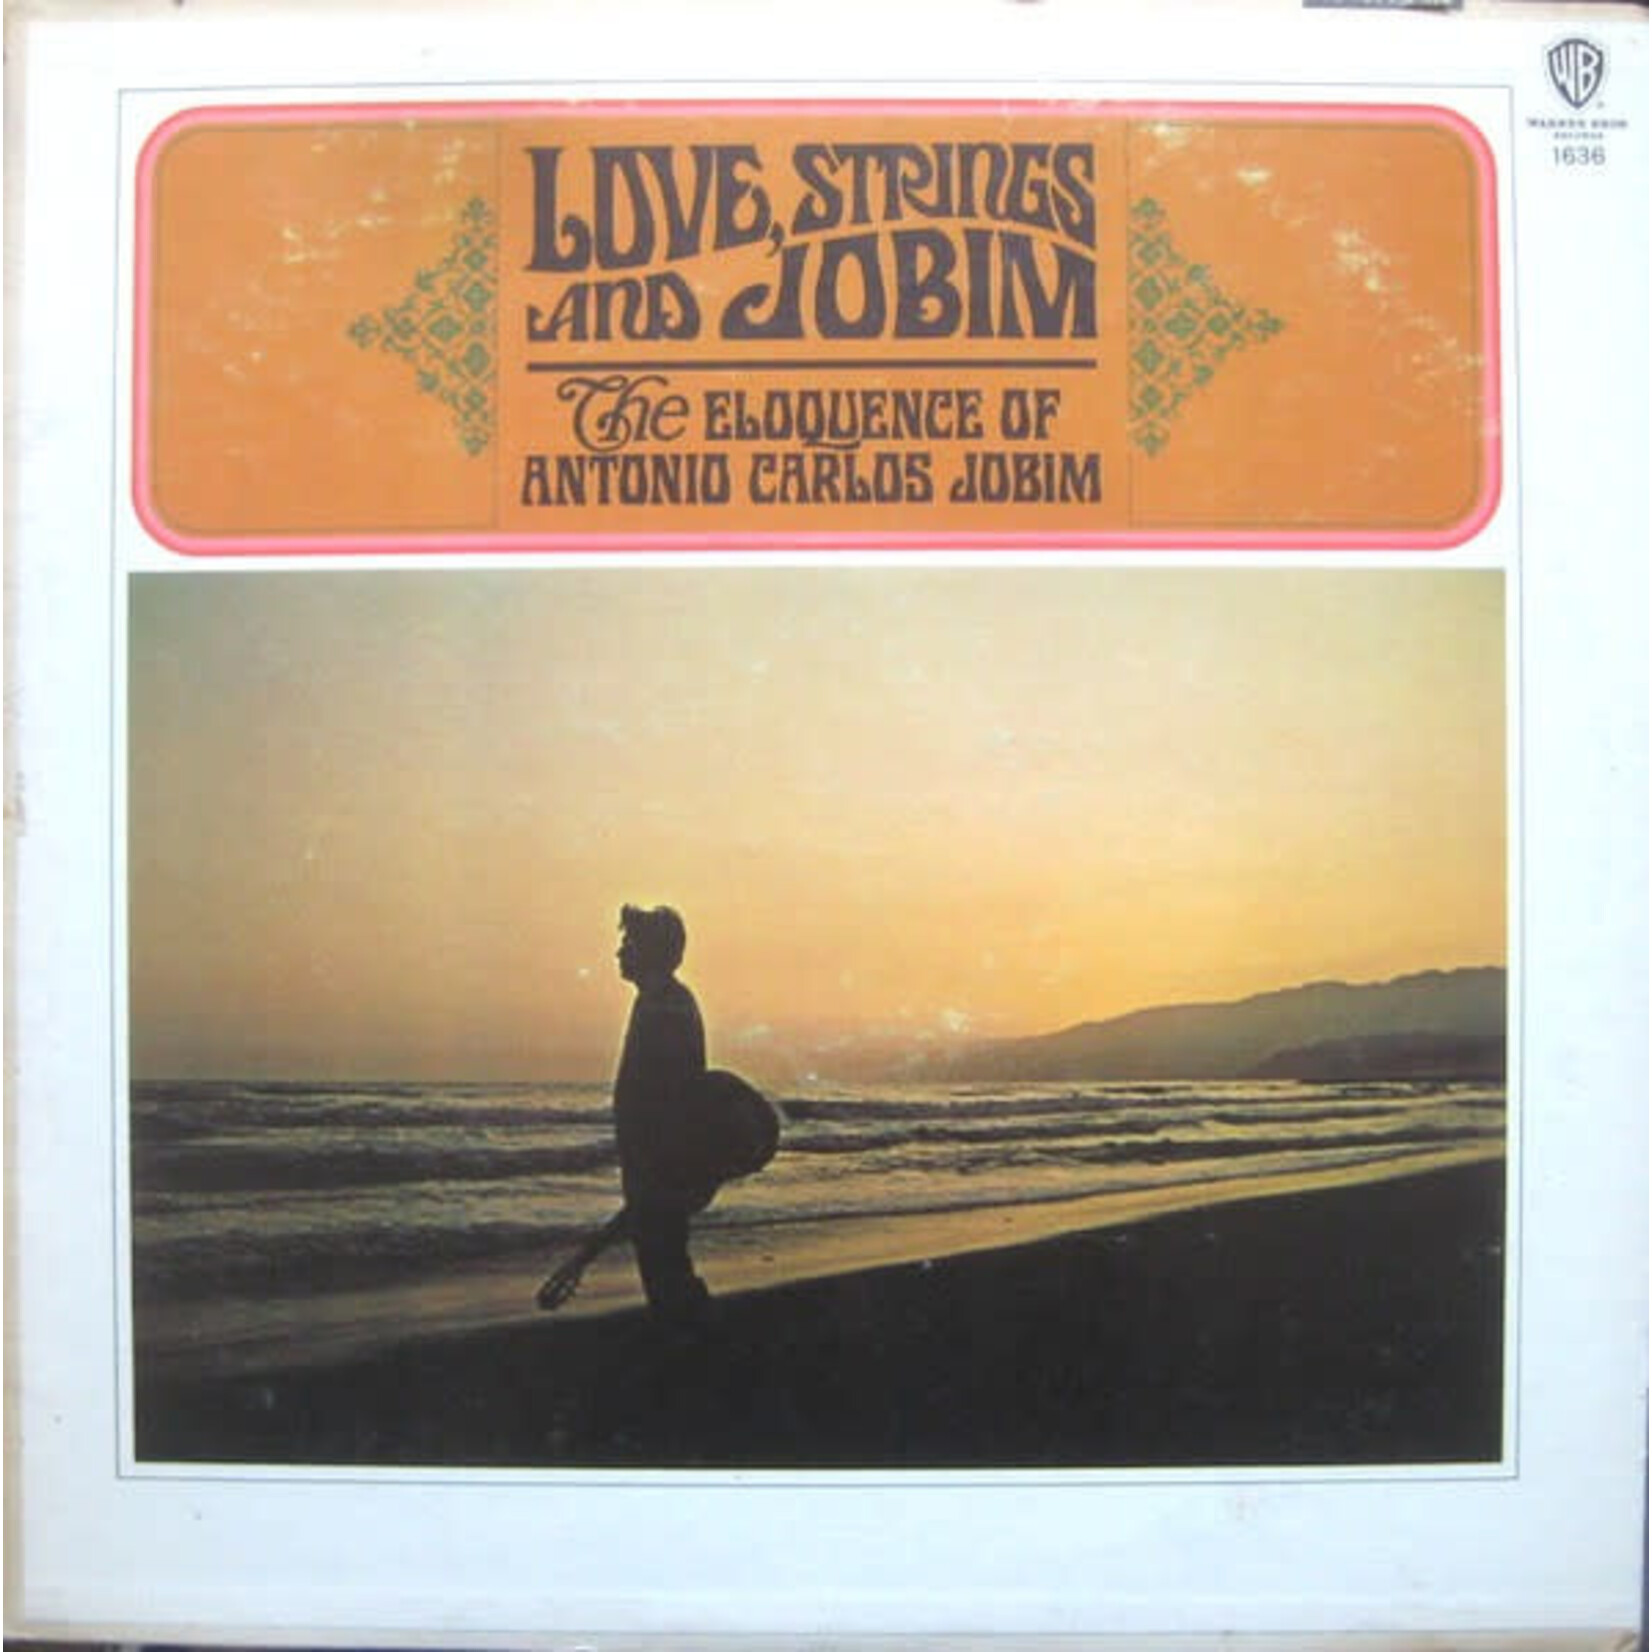 [Vintage] Jobim, Anotion Carlos: The Eloquence of (in shrink) [KOLLECTIBLES]